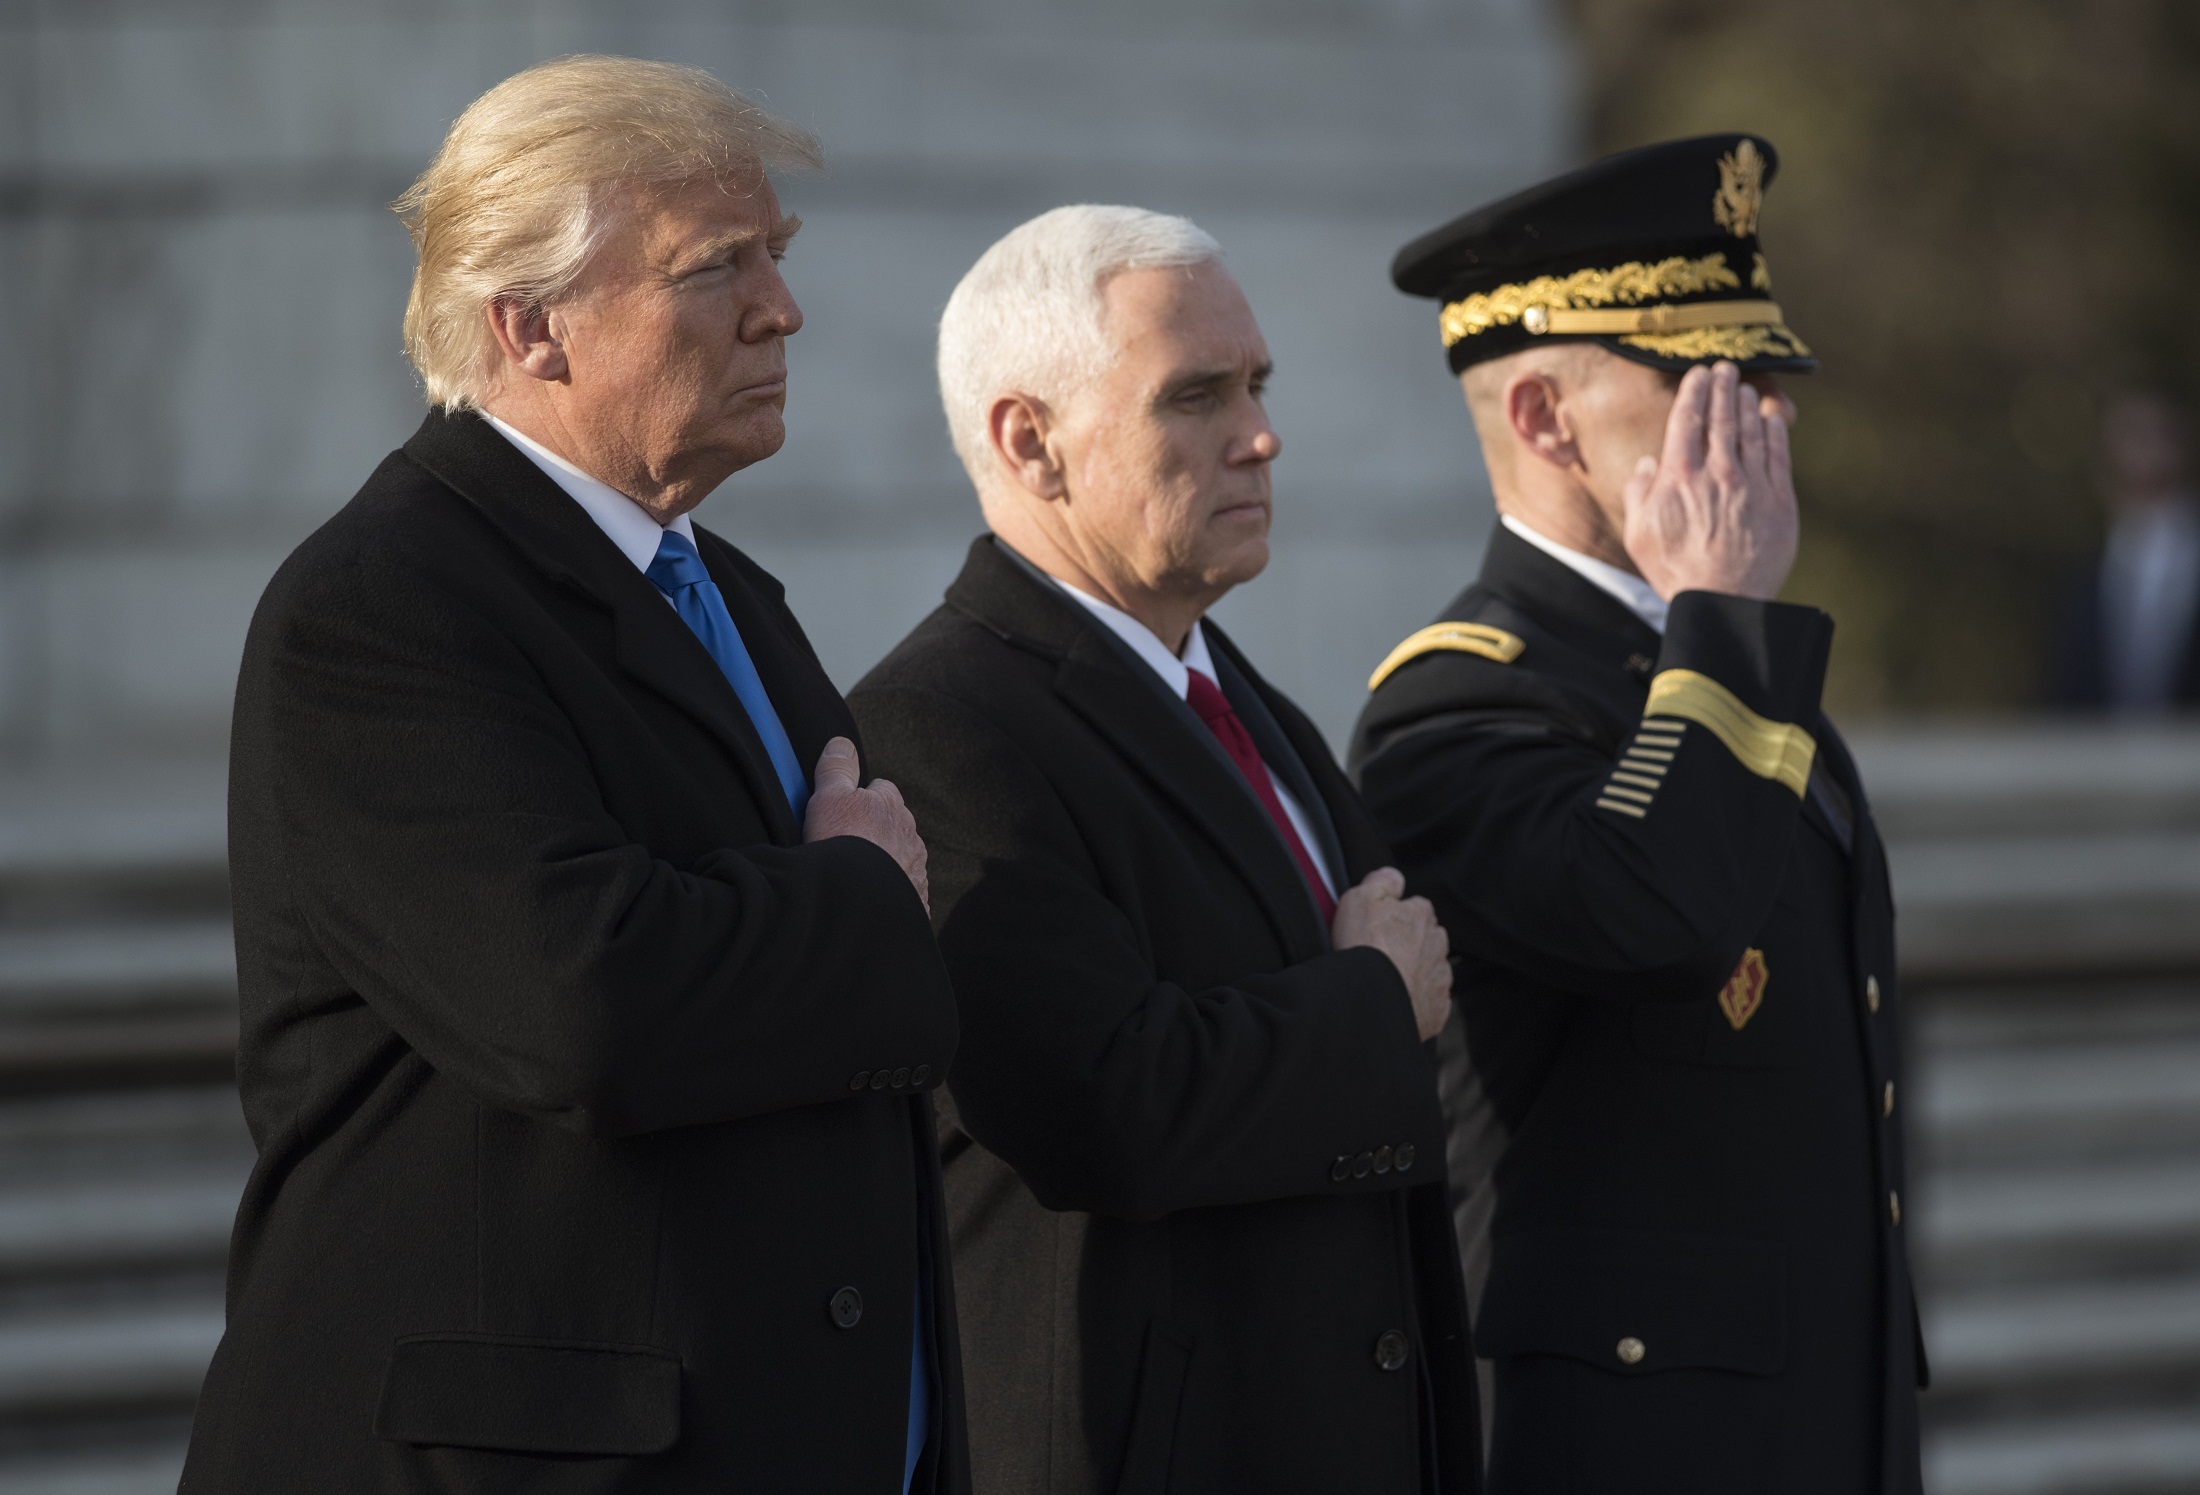 US President-elect Donald Trump and Vice President-elect Mike Pence take part in a wreath-laying ceremony at Arlington National Cemetery in Arlington, Virginia on January 19, 2017. / AFP PHOTO / Mandel Ngan